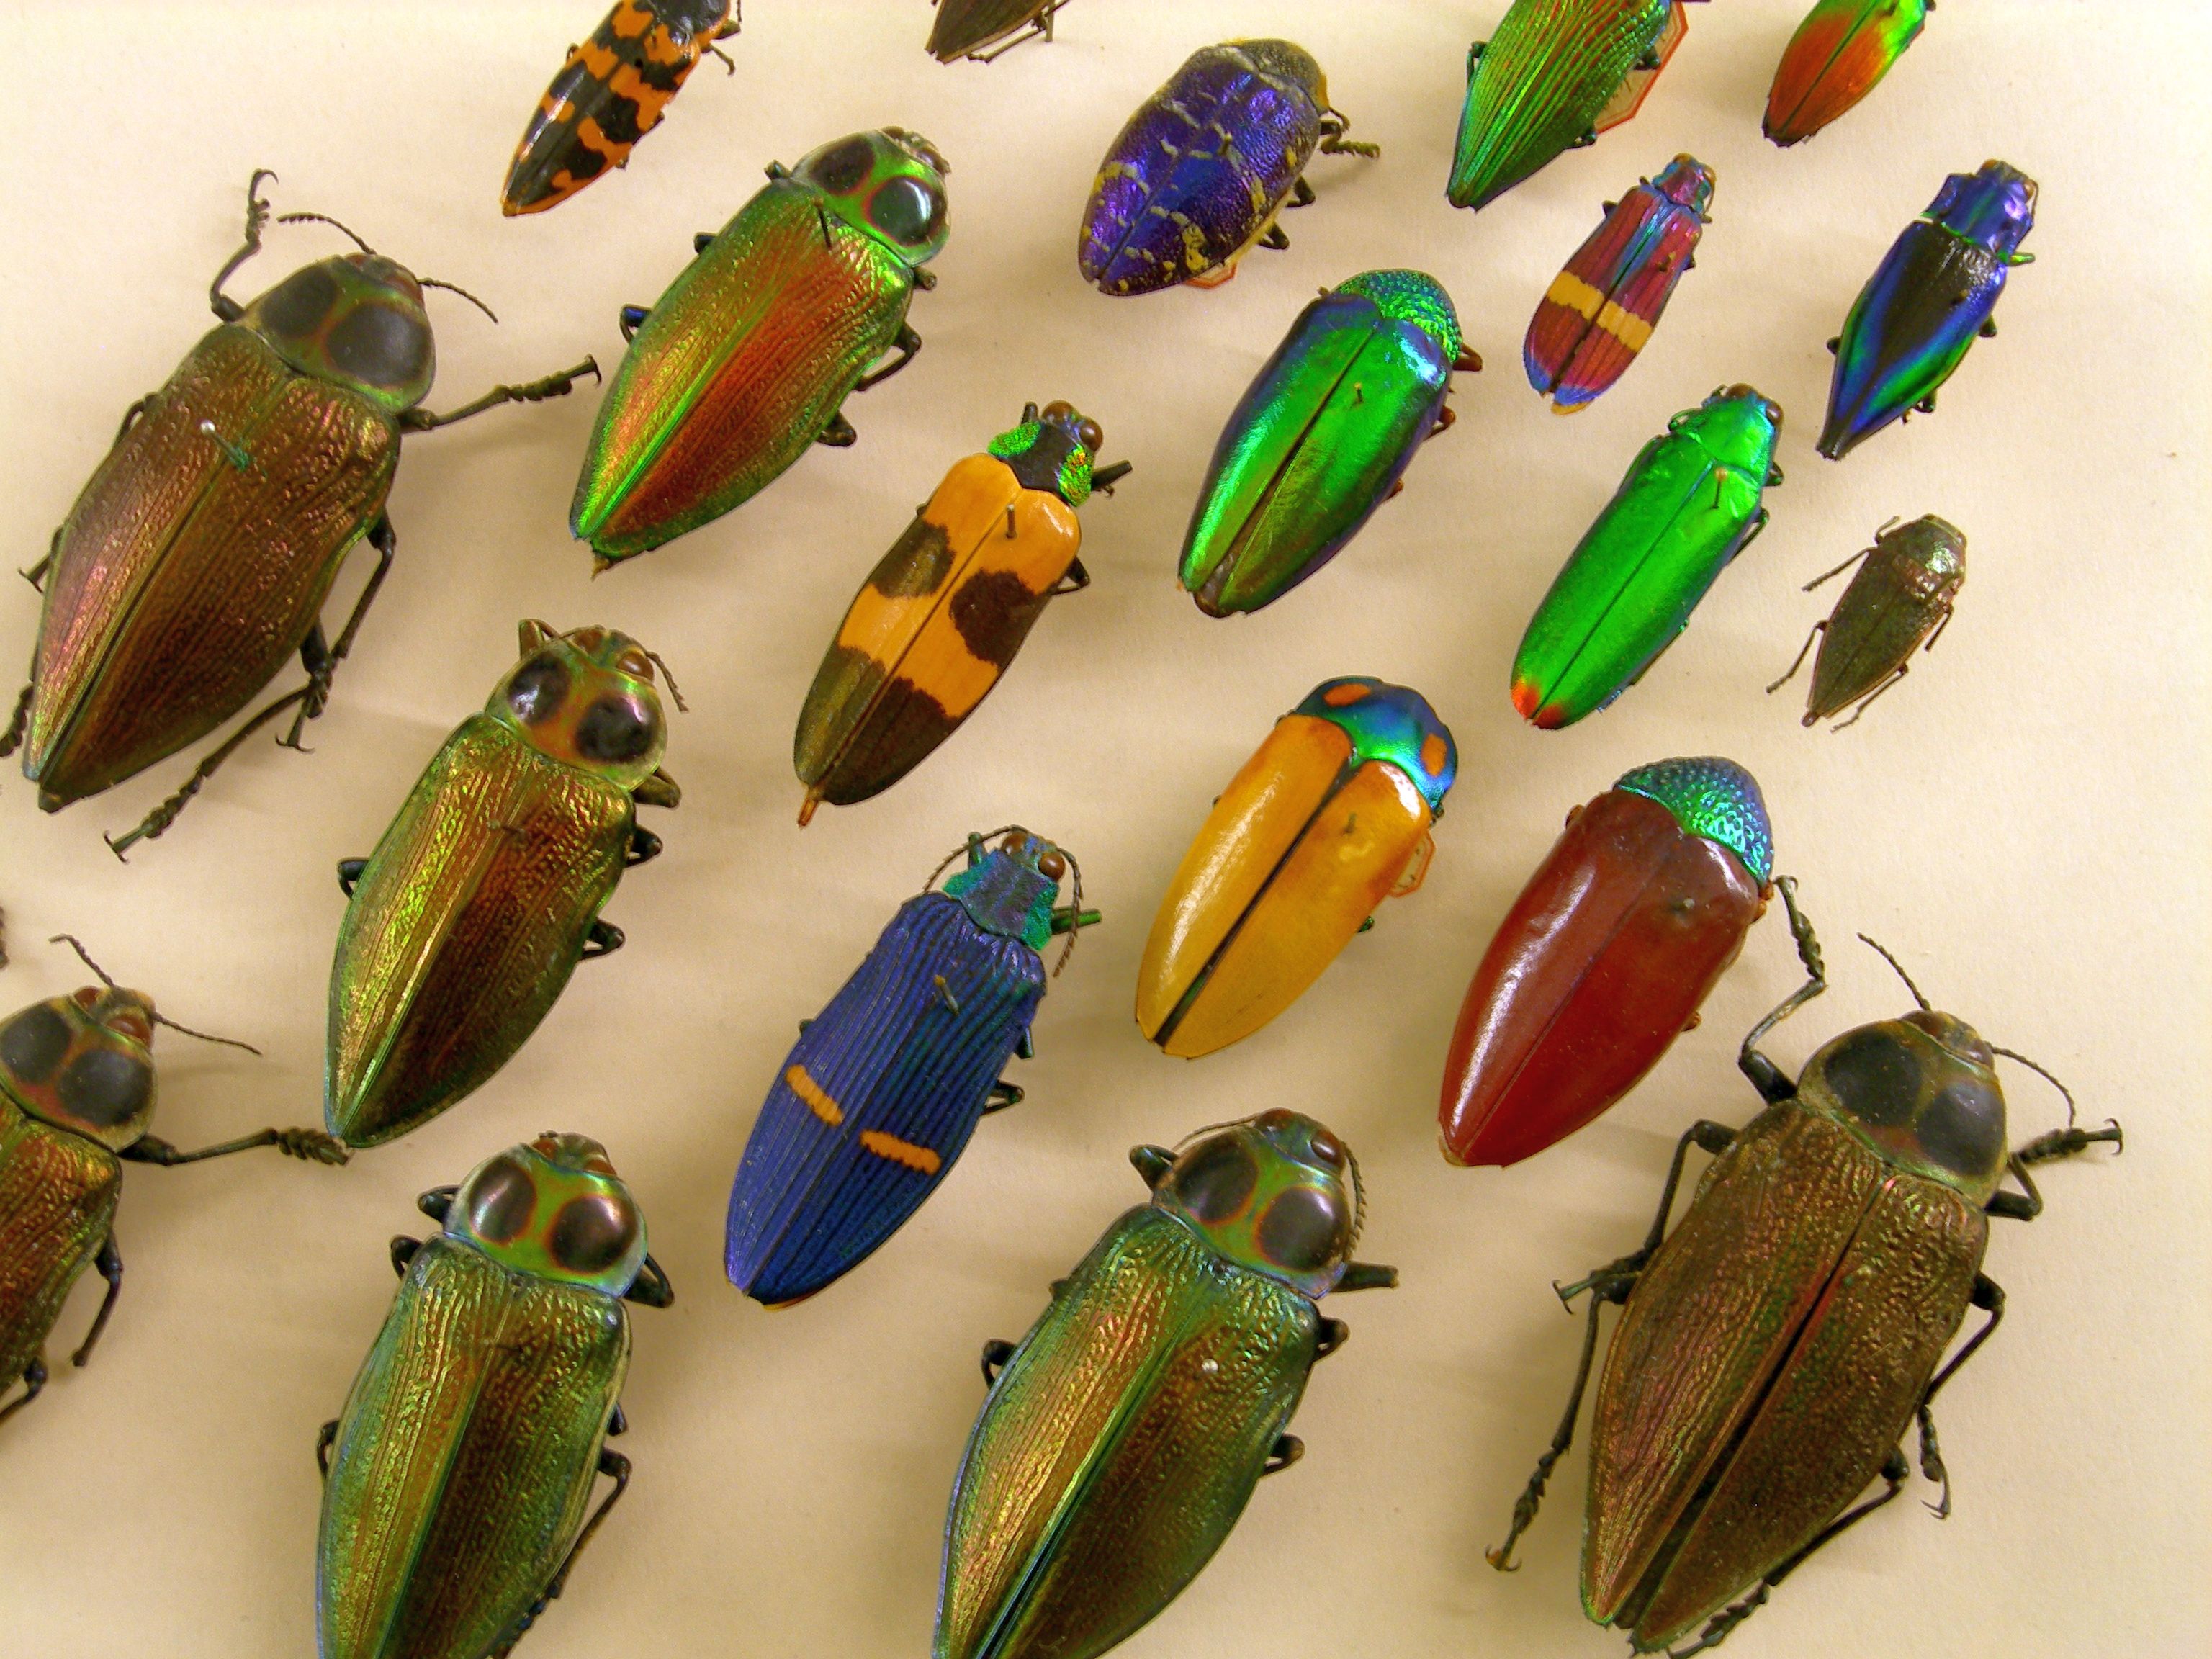 Beetle diversity in the Natural History Museum. Mouse click leads to enlarged view 